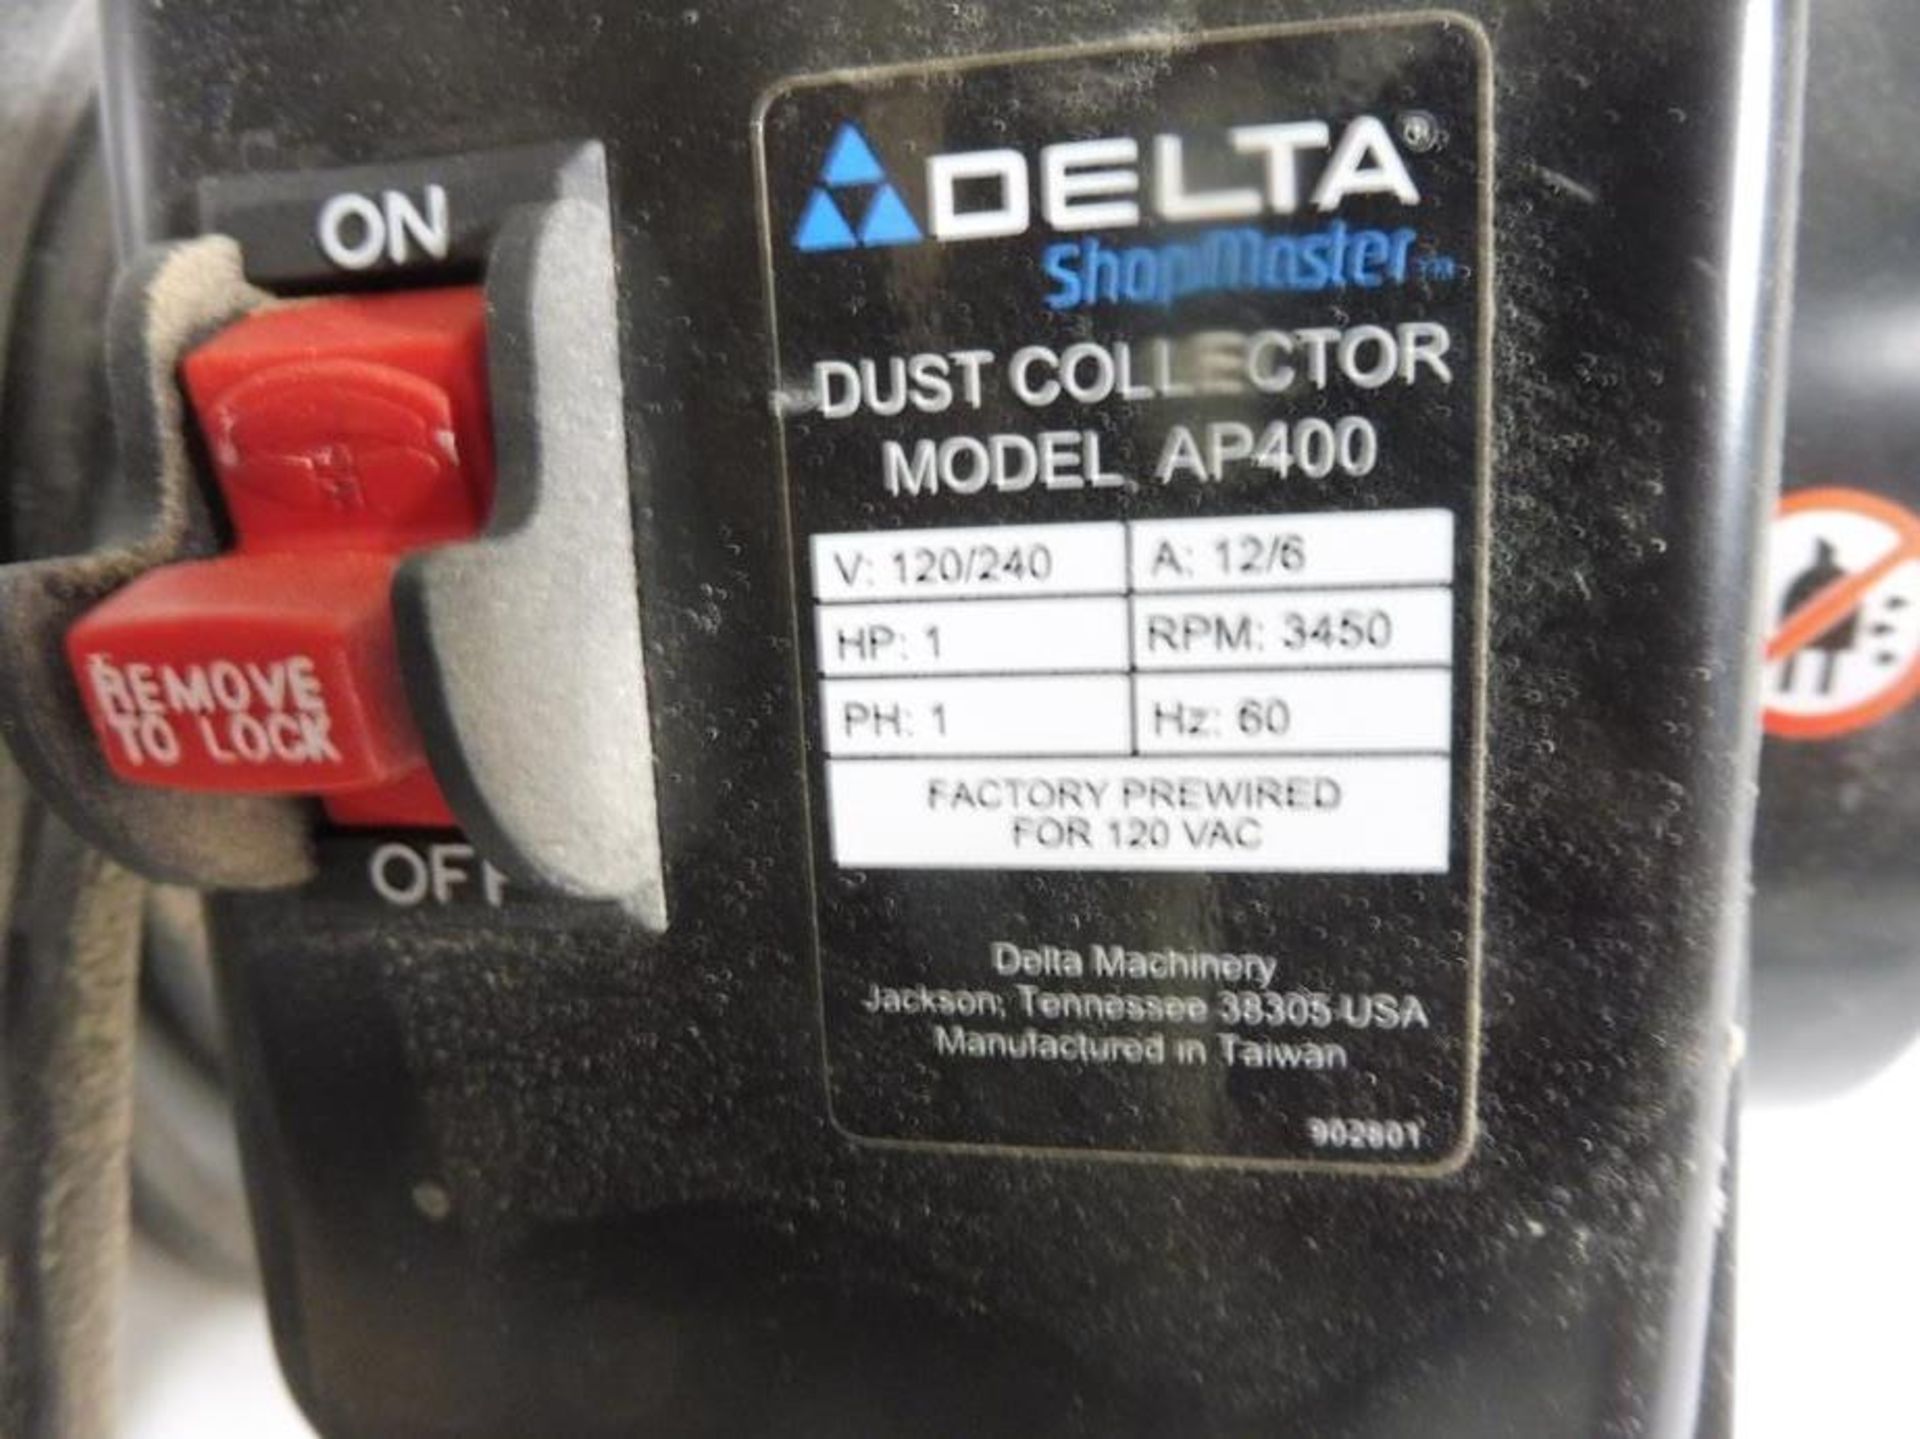 DELTA "AP-400" Single Cylinder Dust Collector, 1 HP Motor, (North York Facility) - Image 2 of 2